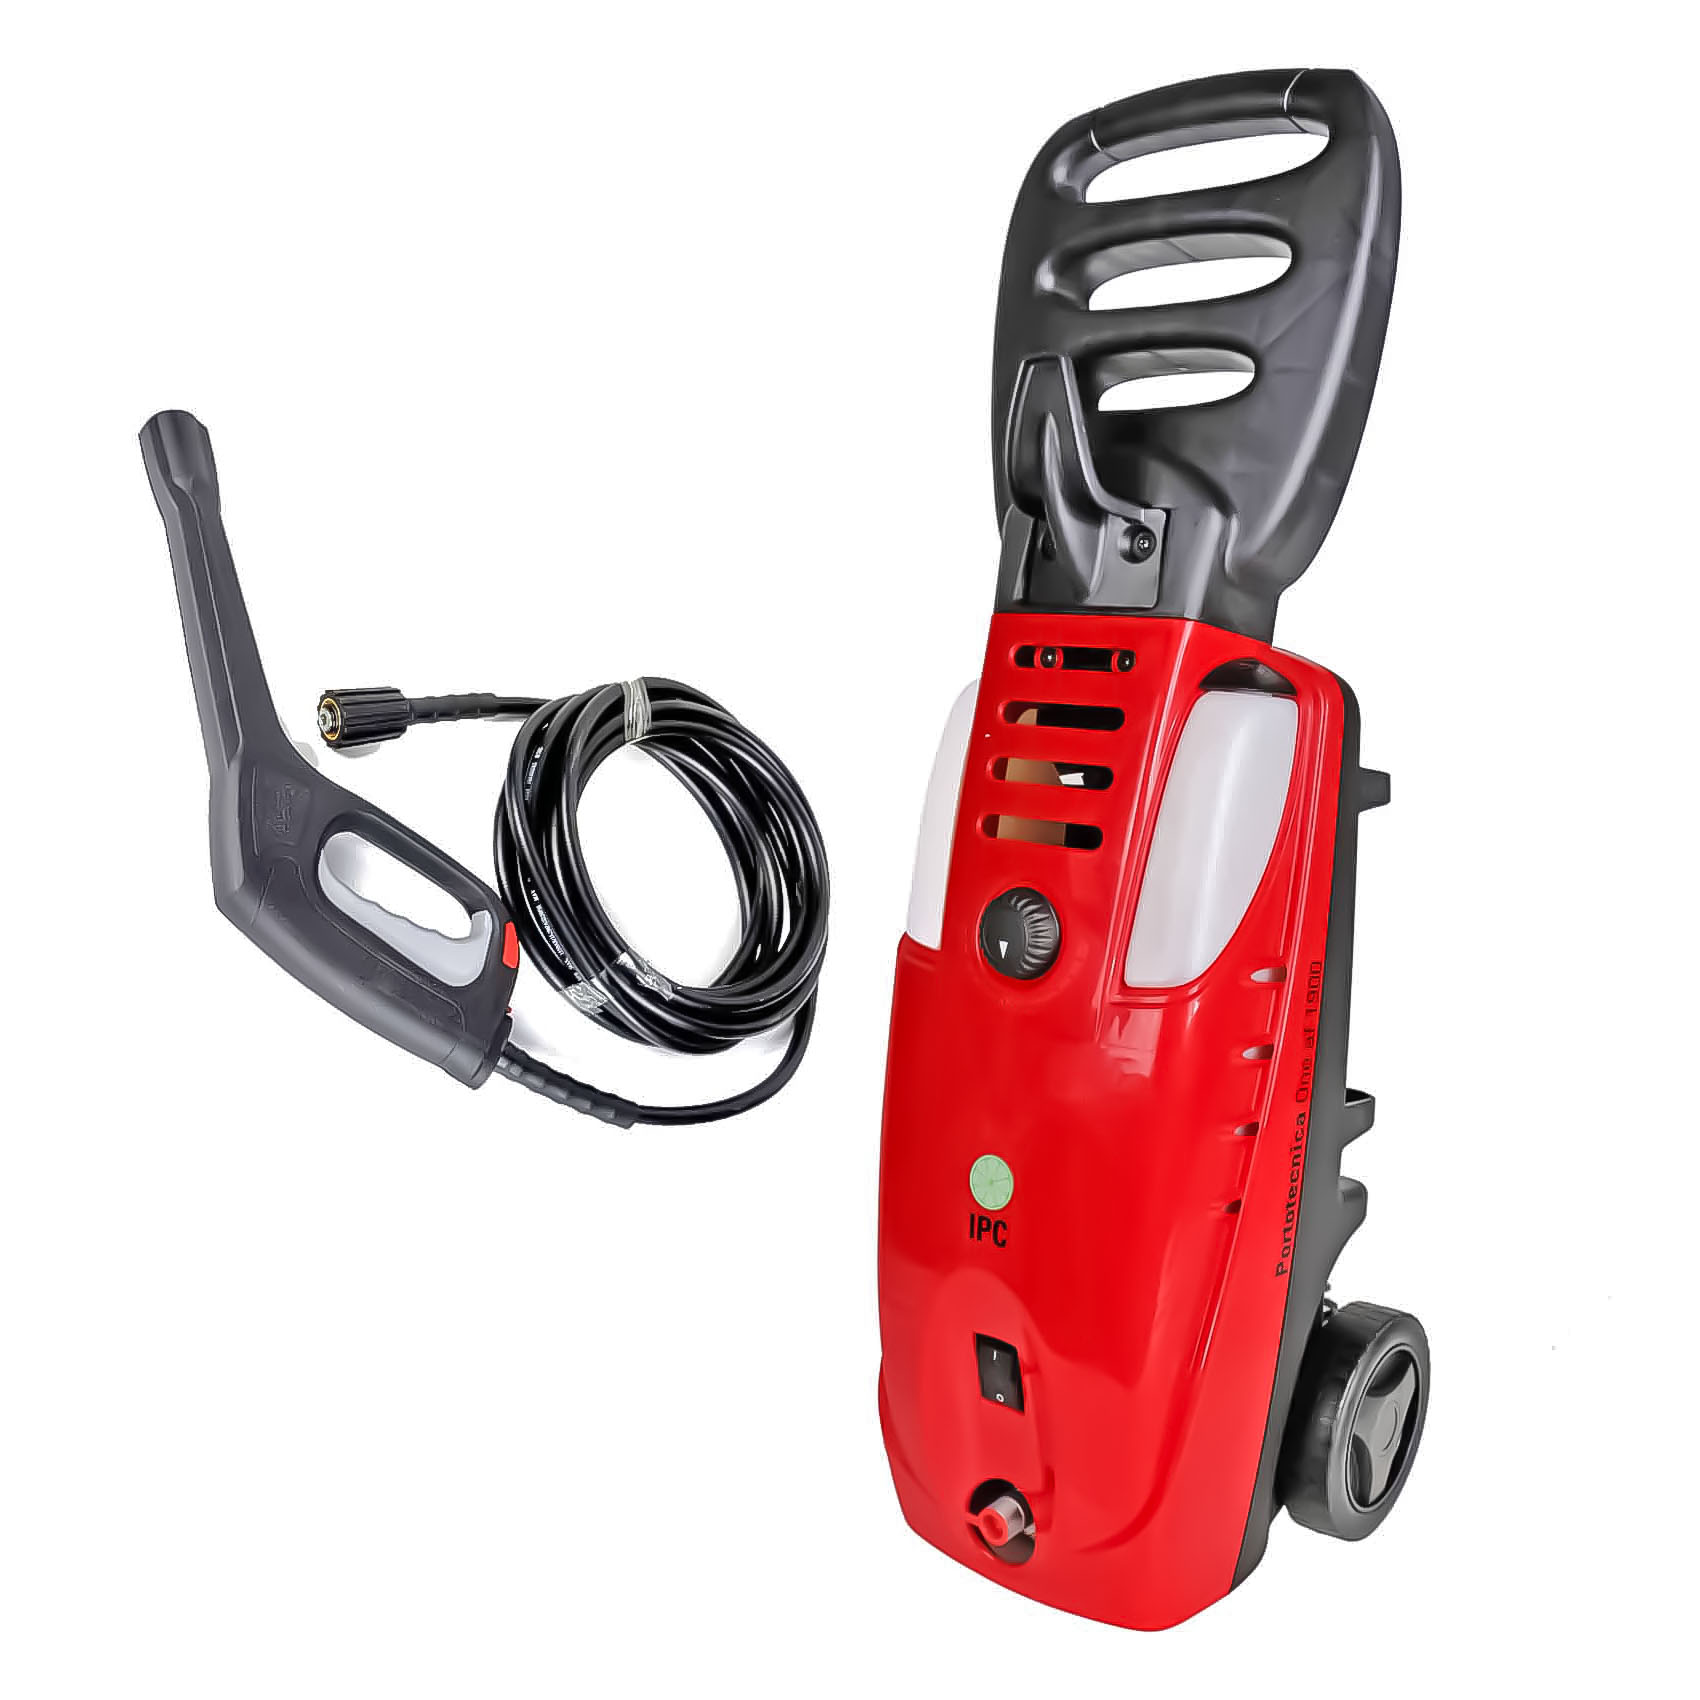 IPC PORTOTECNICA HIGH PRESSURE WASHER 1900 Bar ONE AF1900M 92056 MADE IN ITALY | CAR CLEANING | POWER WASHER